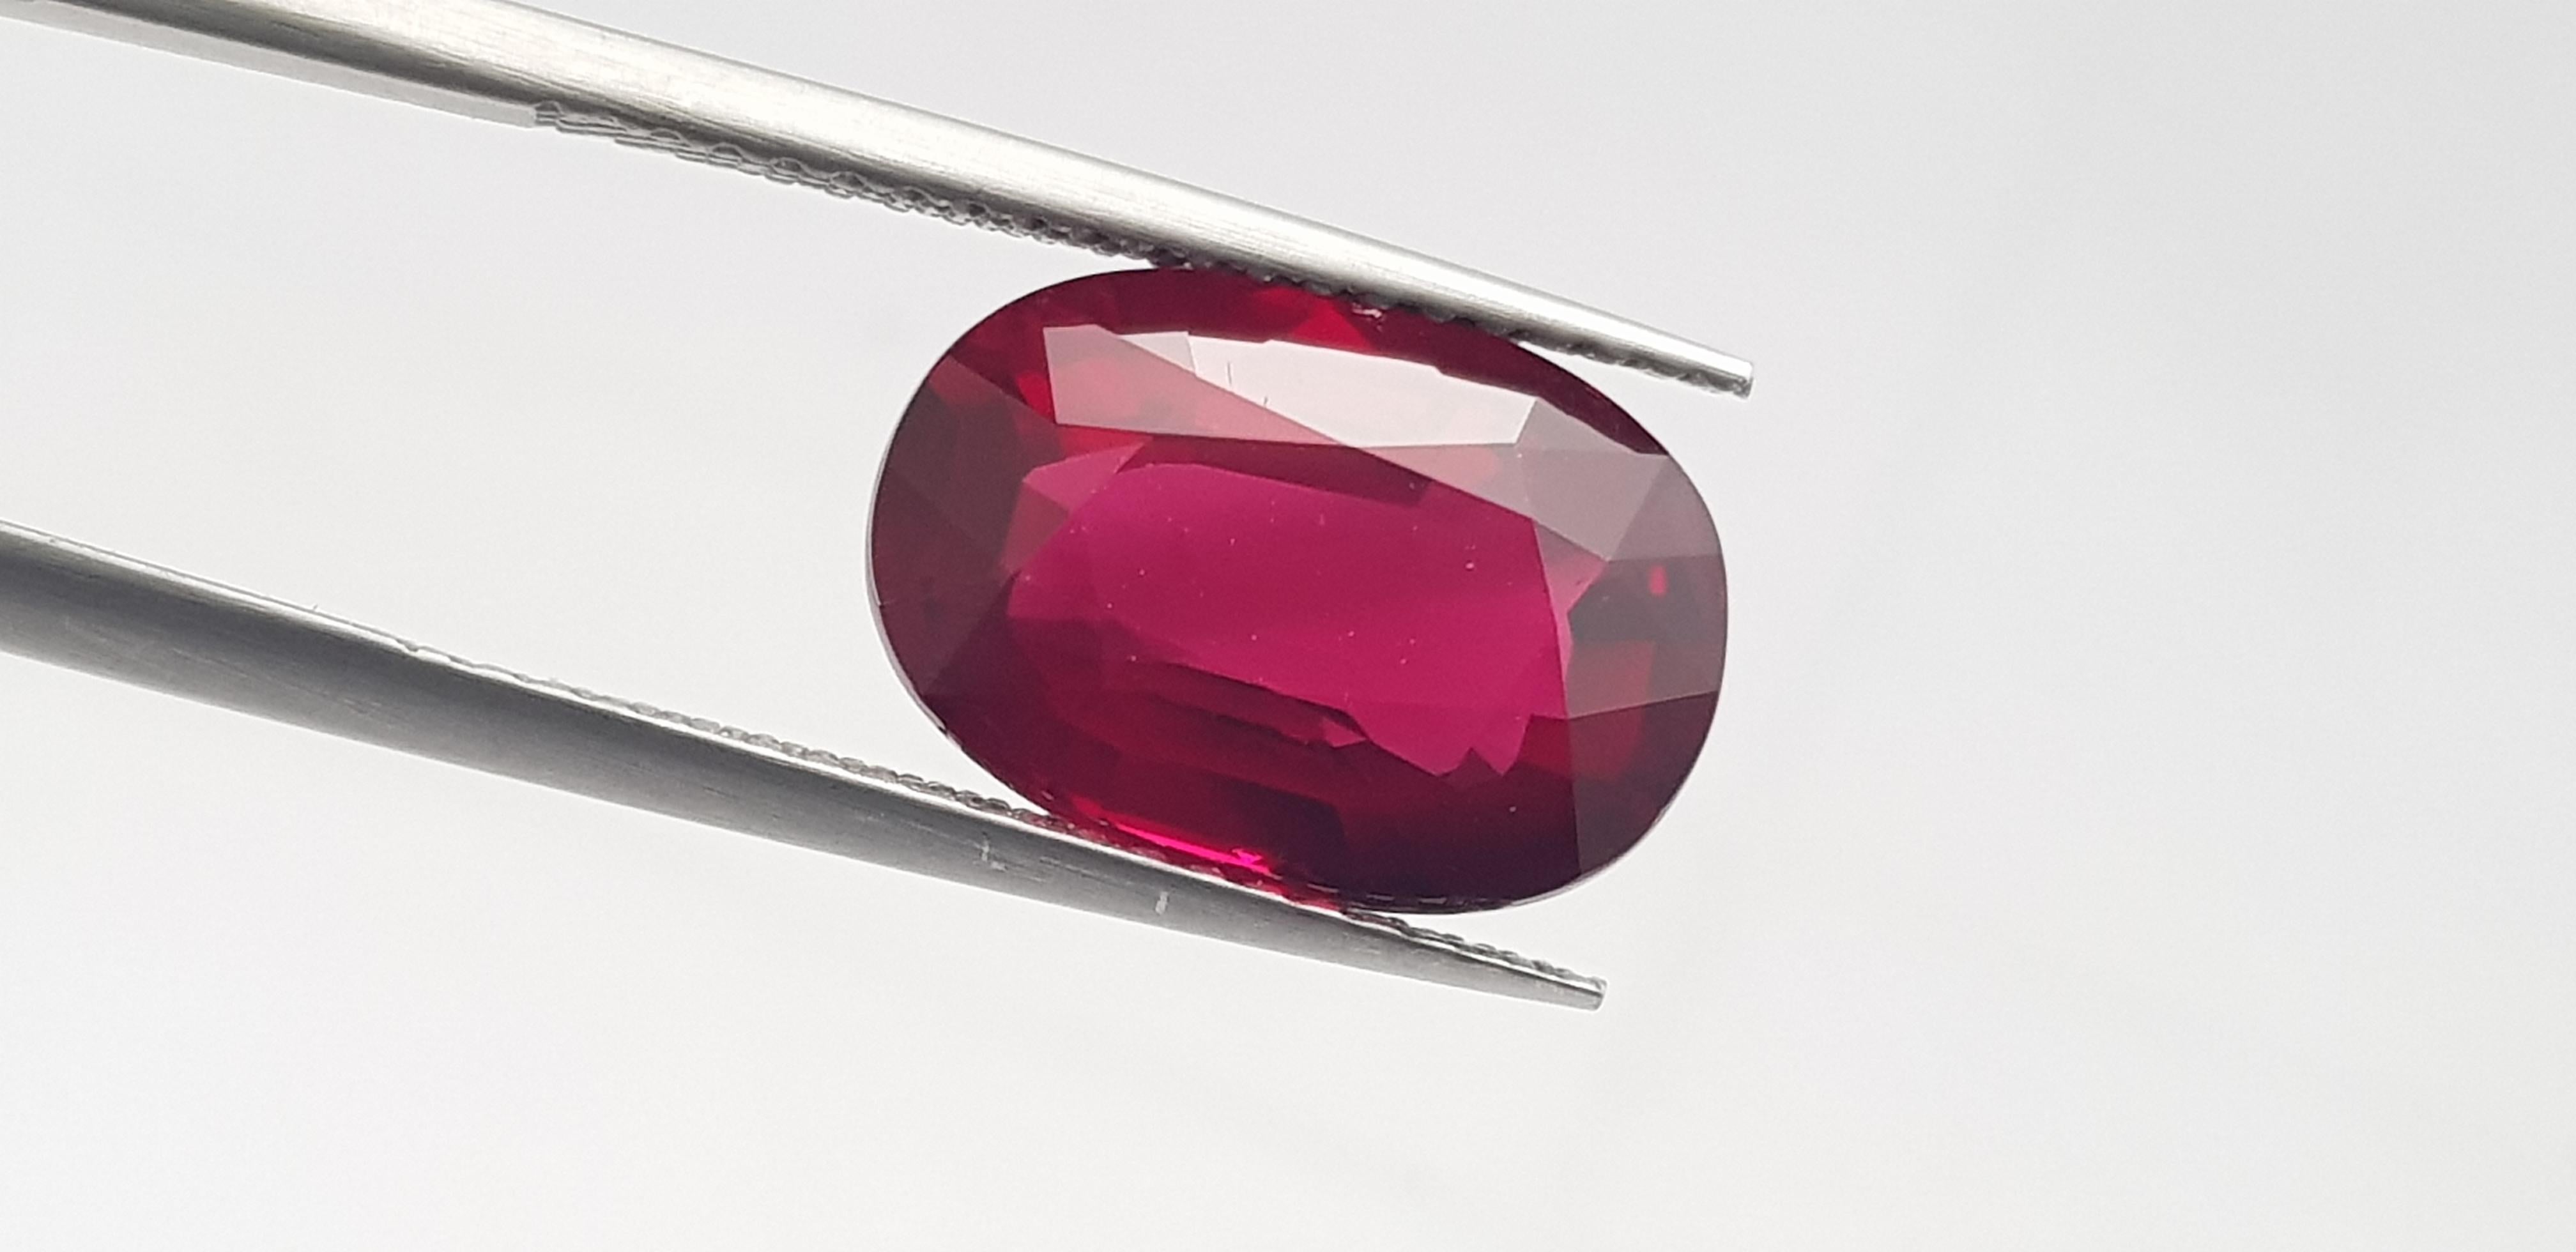 5ct Unheated Mozambican 'Pigeons Blood' Ruby In New Condition For Sale In London, GB